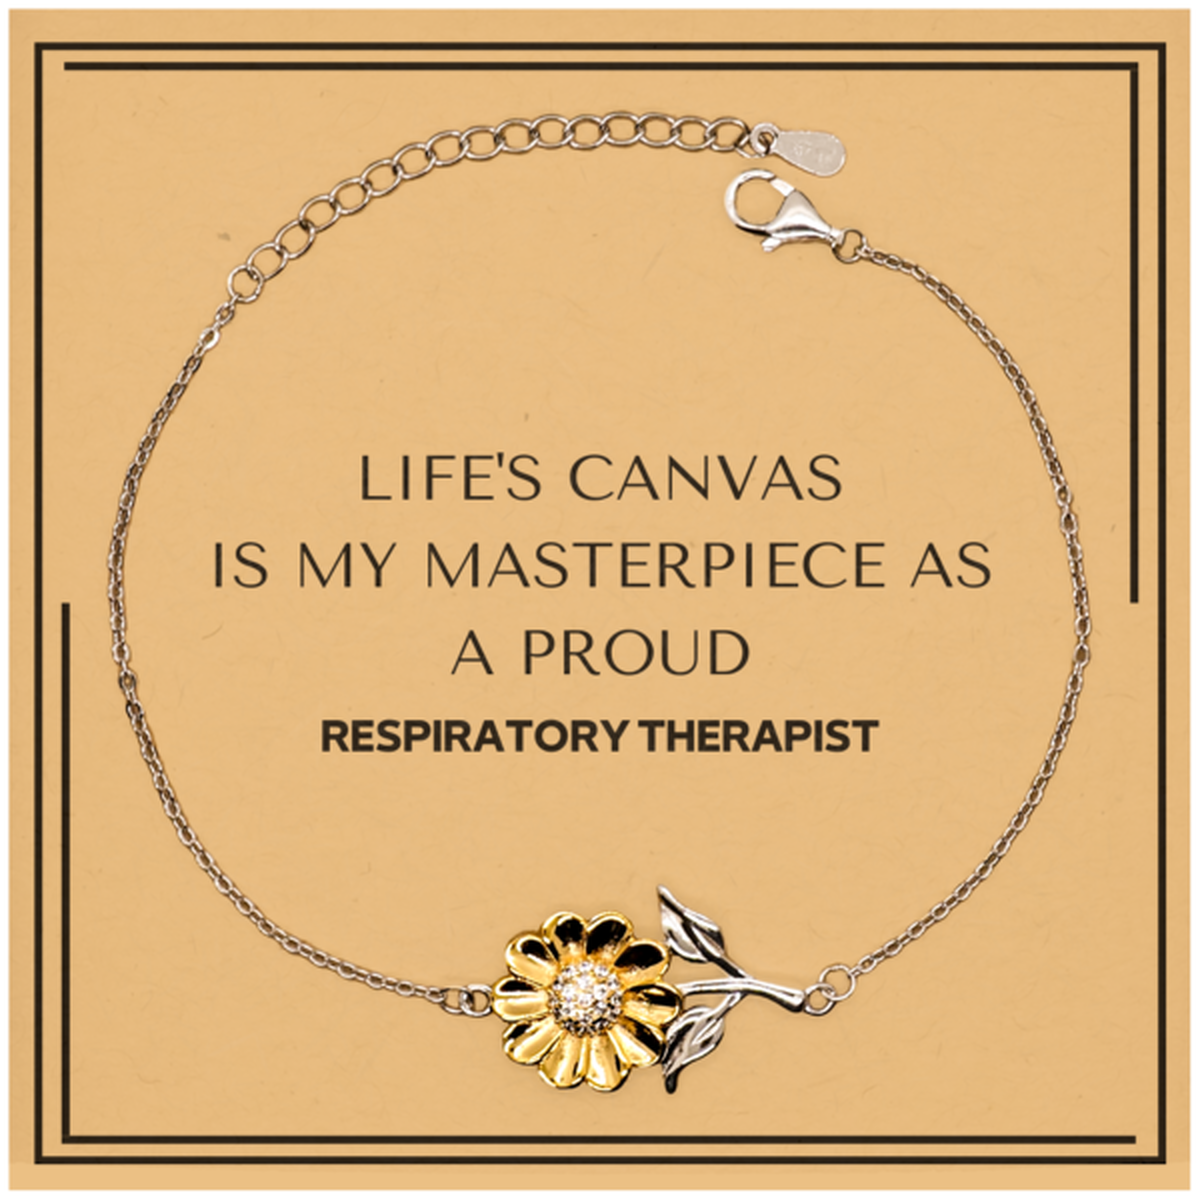 Proud Respiratory Therapist Gifts, Life's canvas is my masterpiece, Epic Birthday Christmas Unique Sunflower Bracelet For Respiratory Therapist, Coworkers, Men, Women, Friends